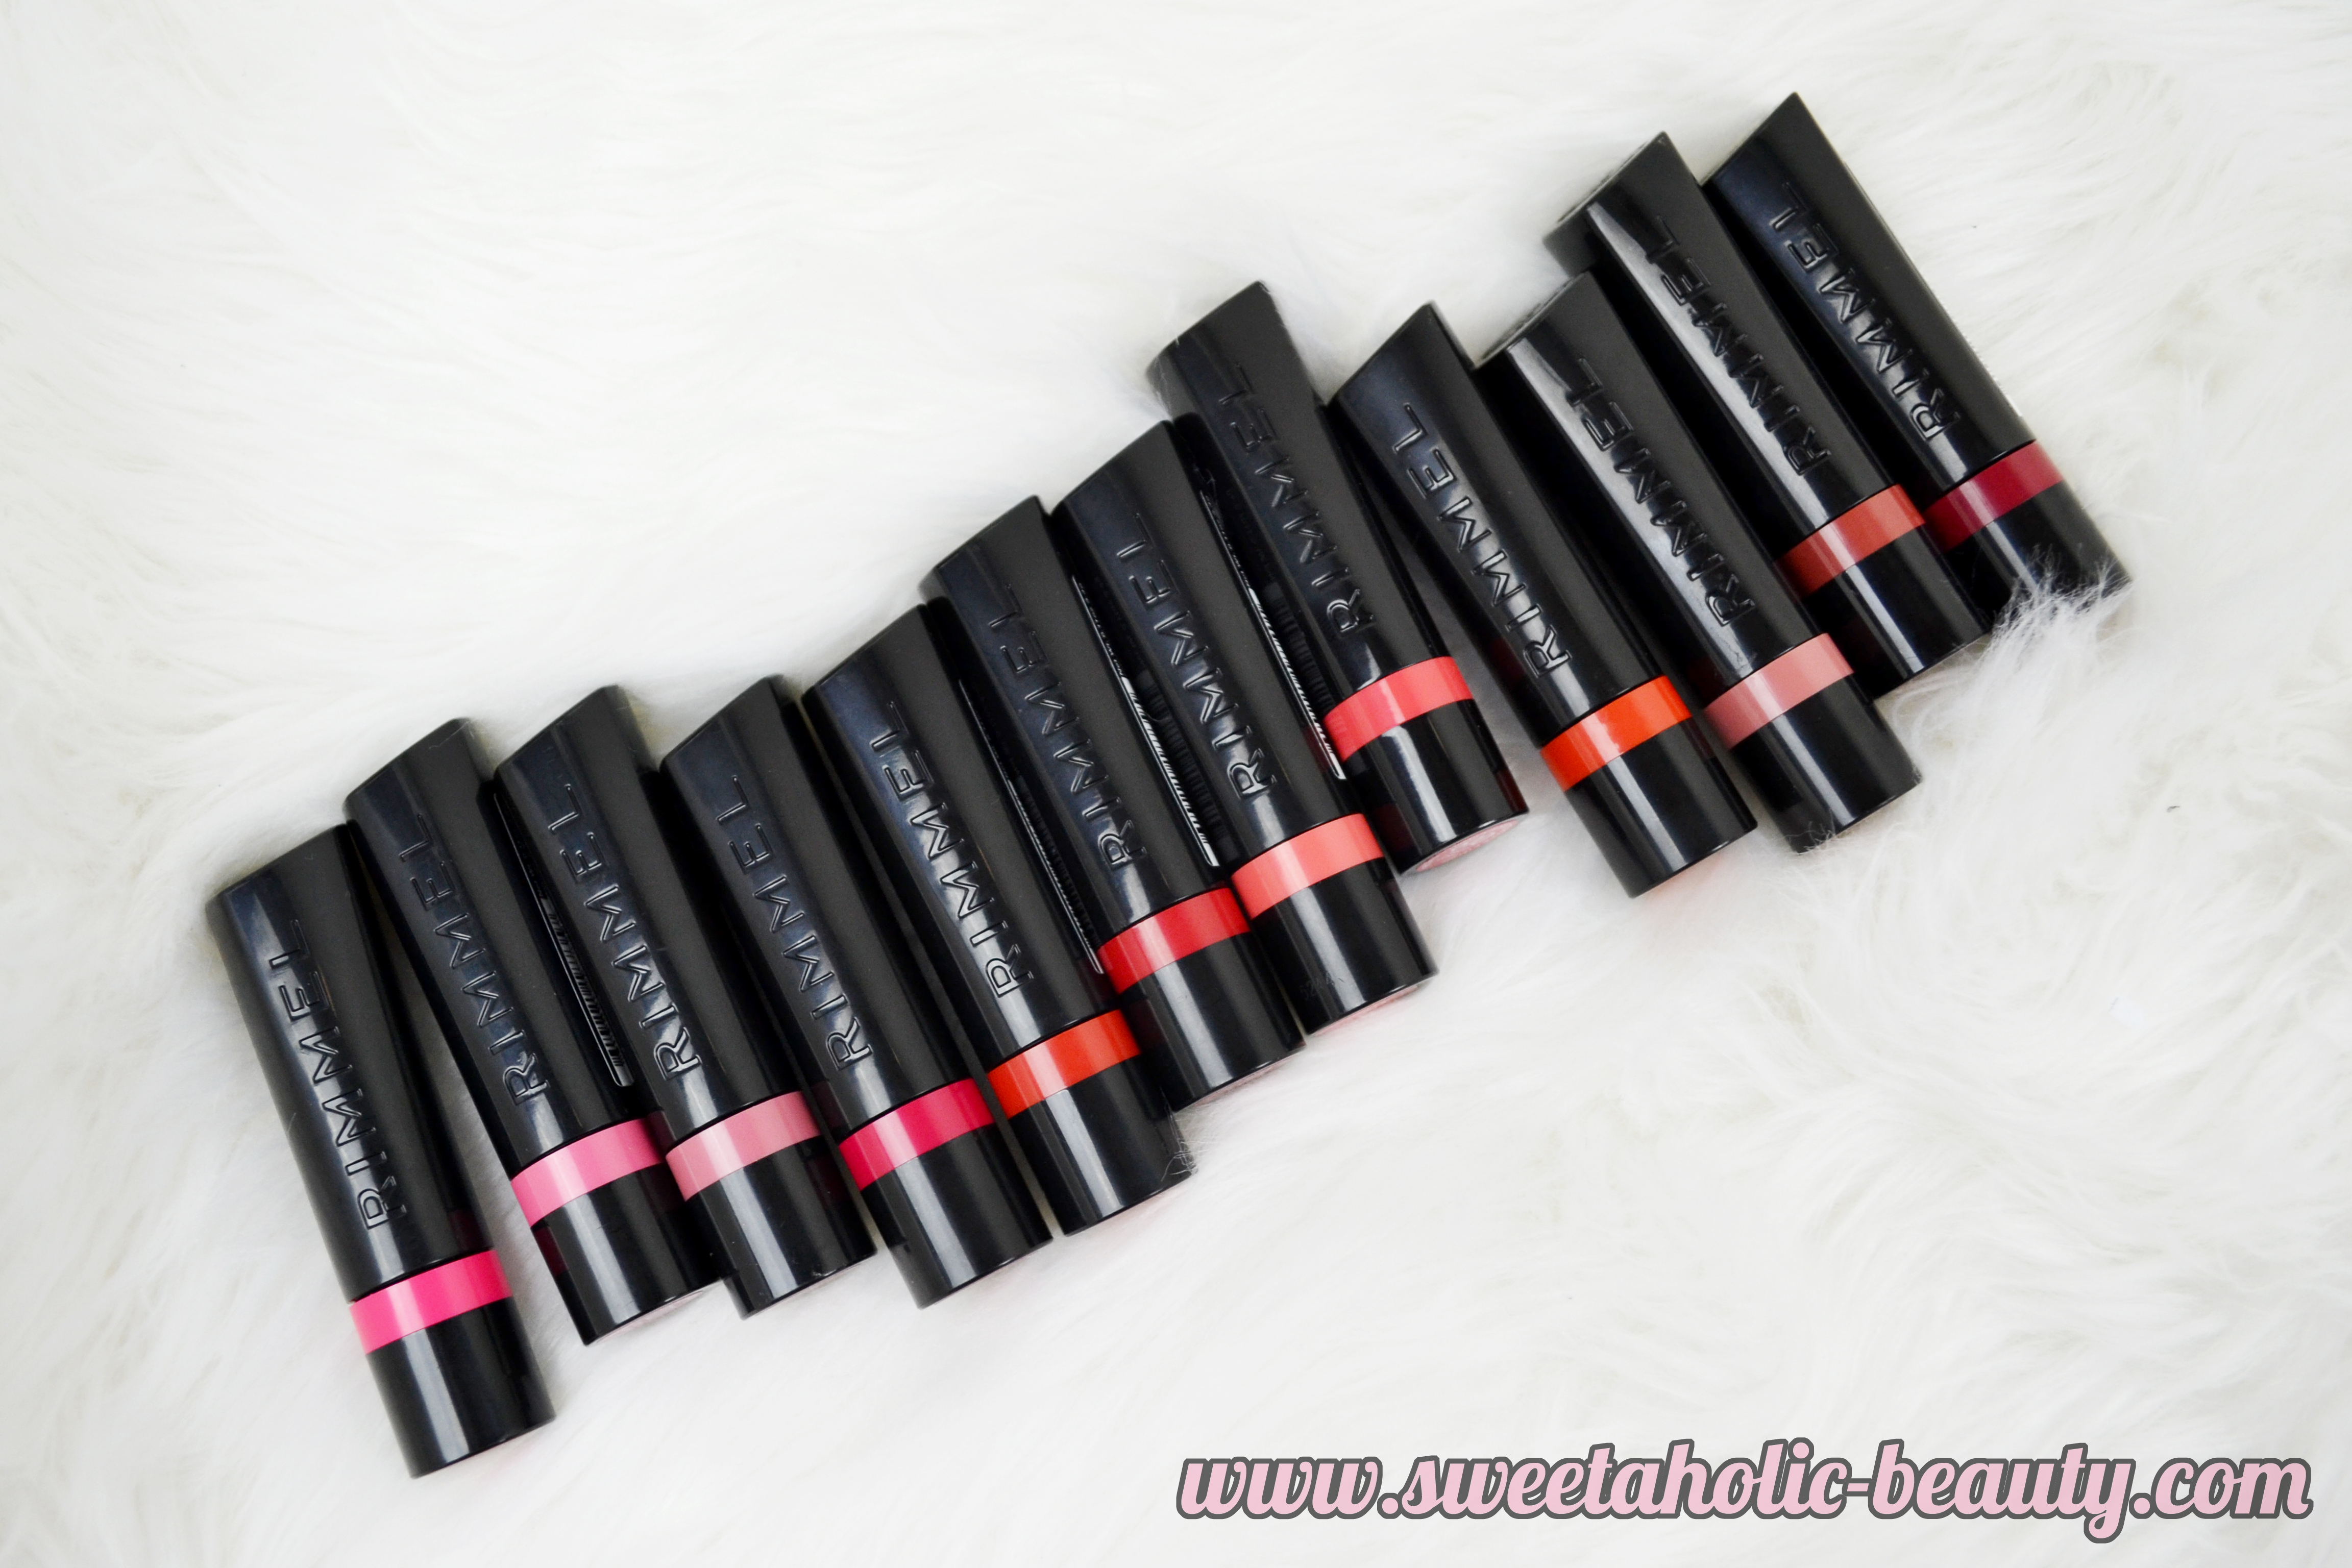 Rimmel London The Only One Lipstick Collection Review & Swatches - Sweetaholic Beauty